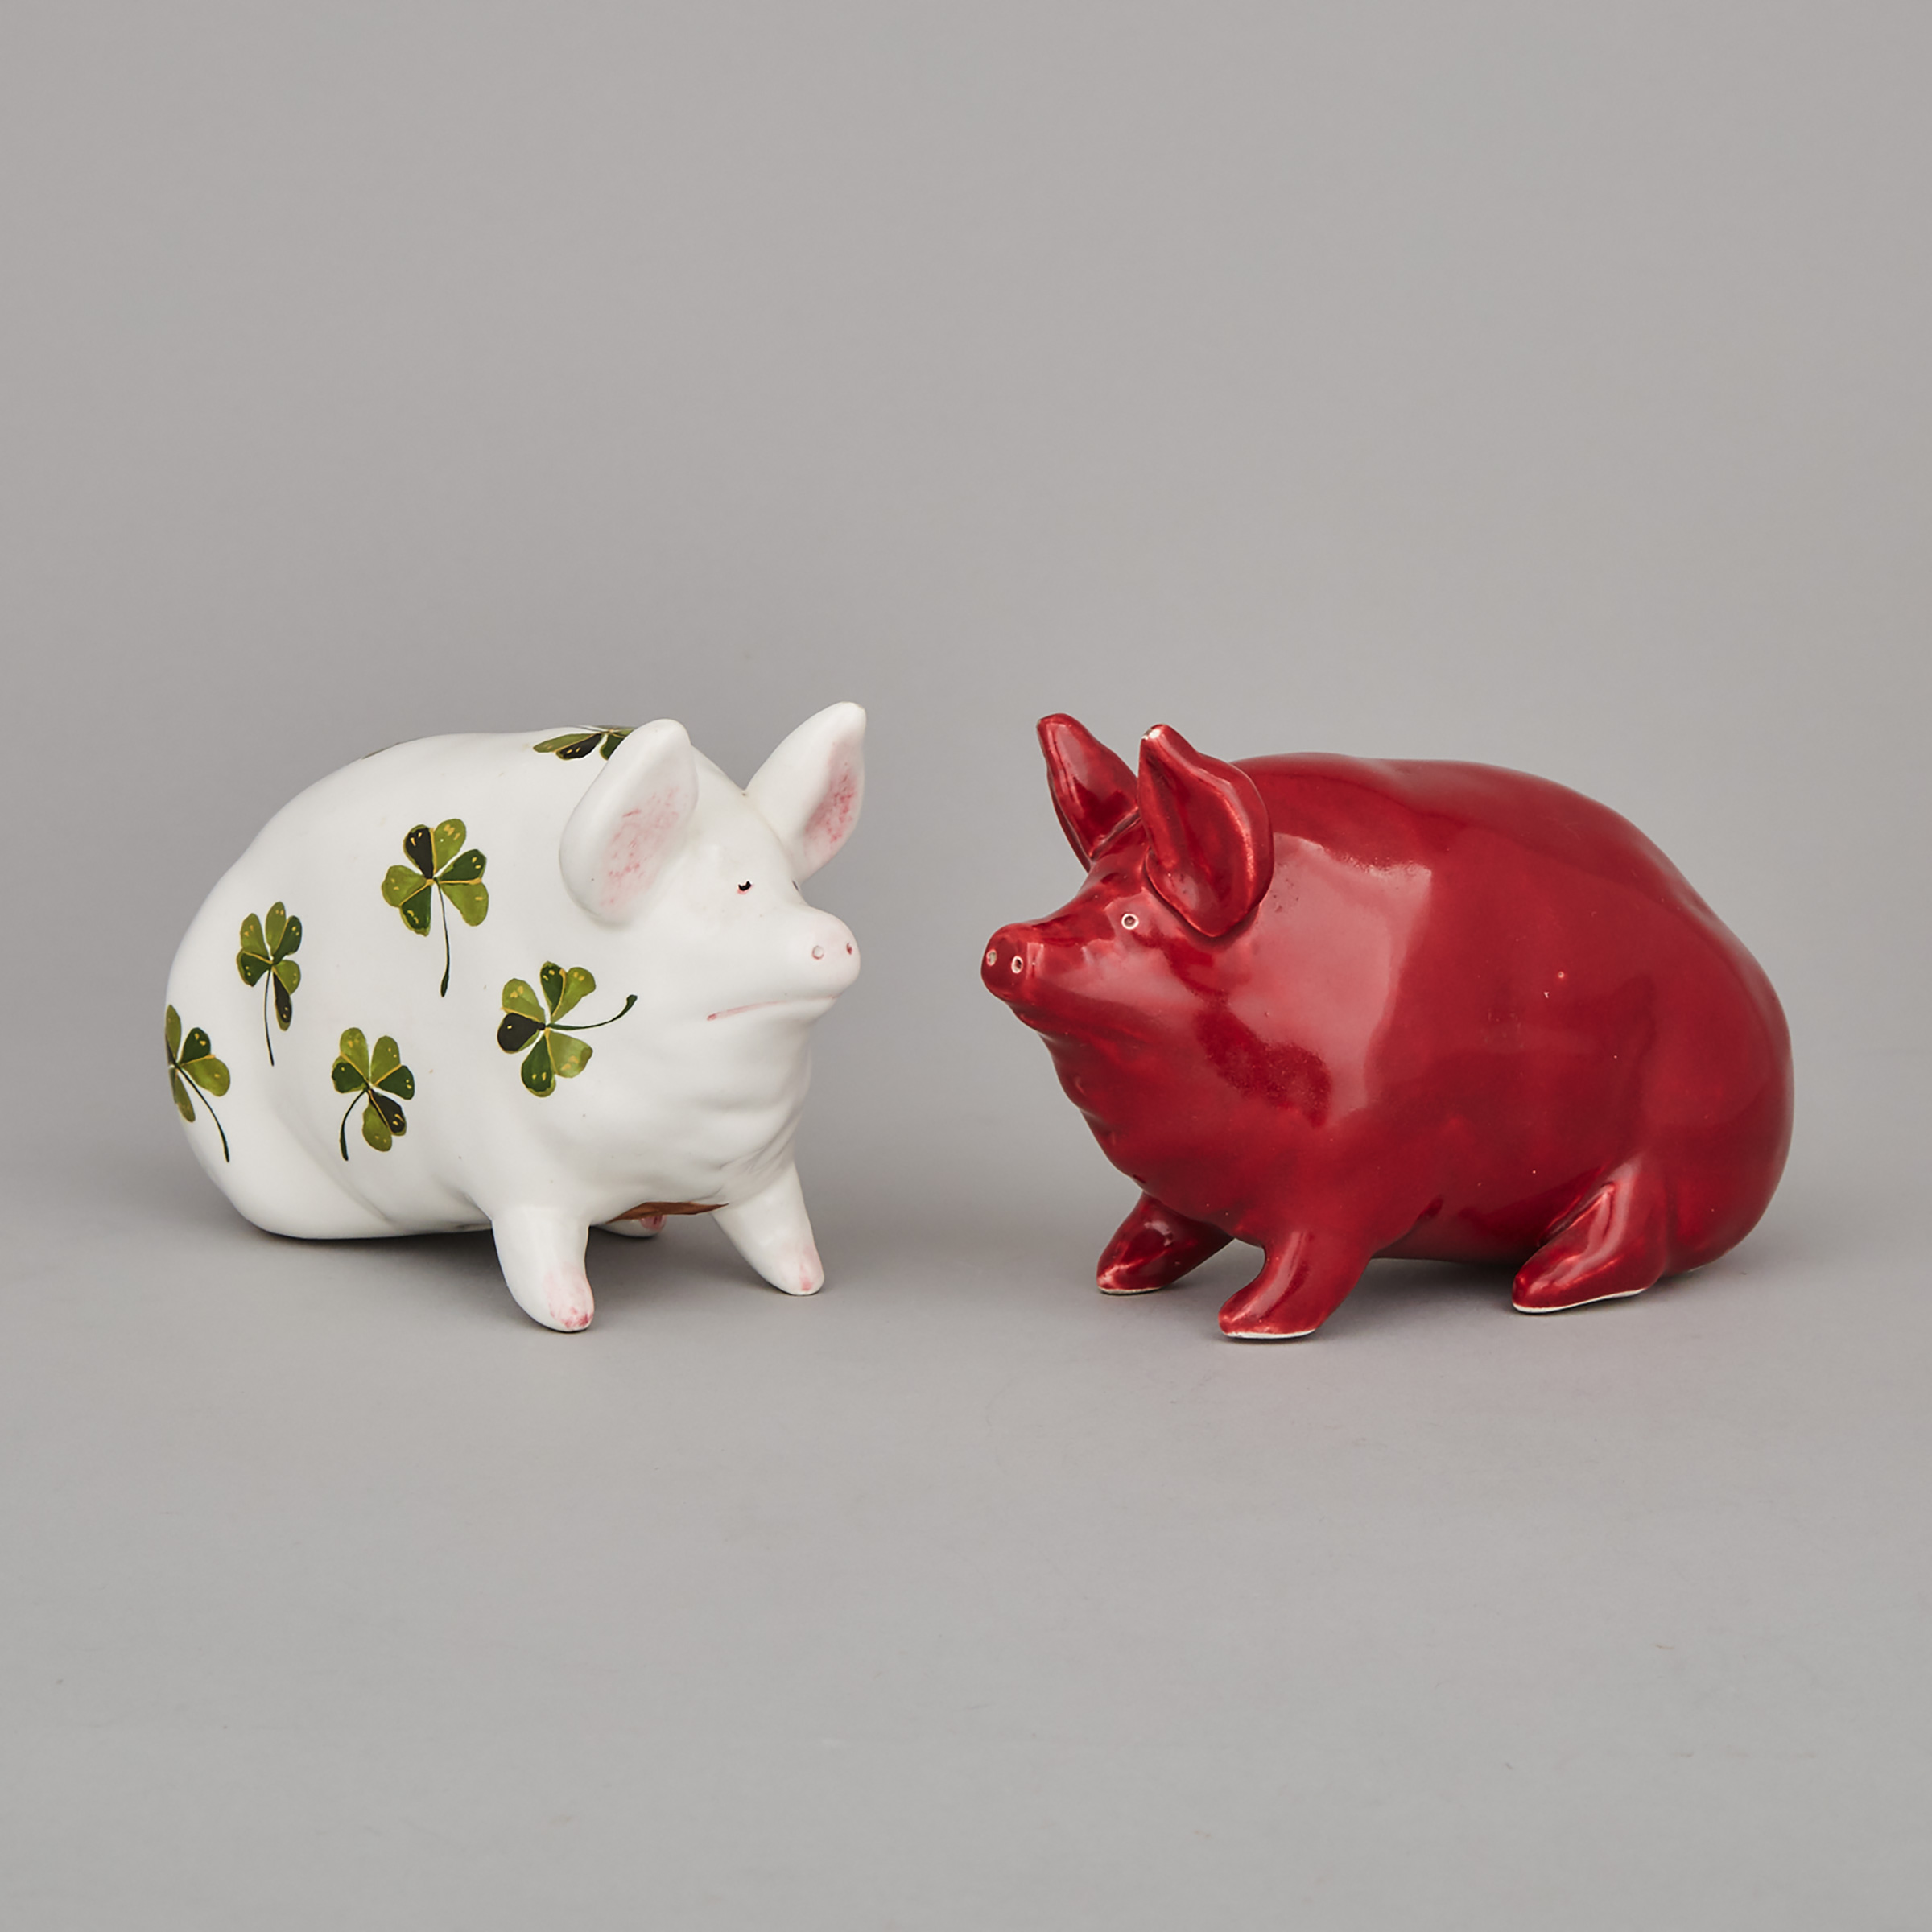 Two Plitchta or Red Wemyss Pigs, 20th century